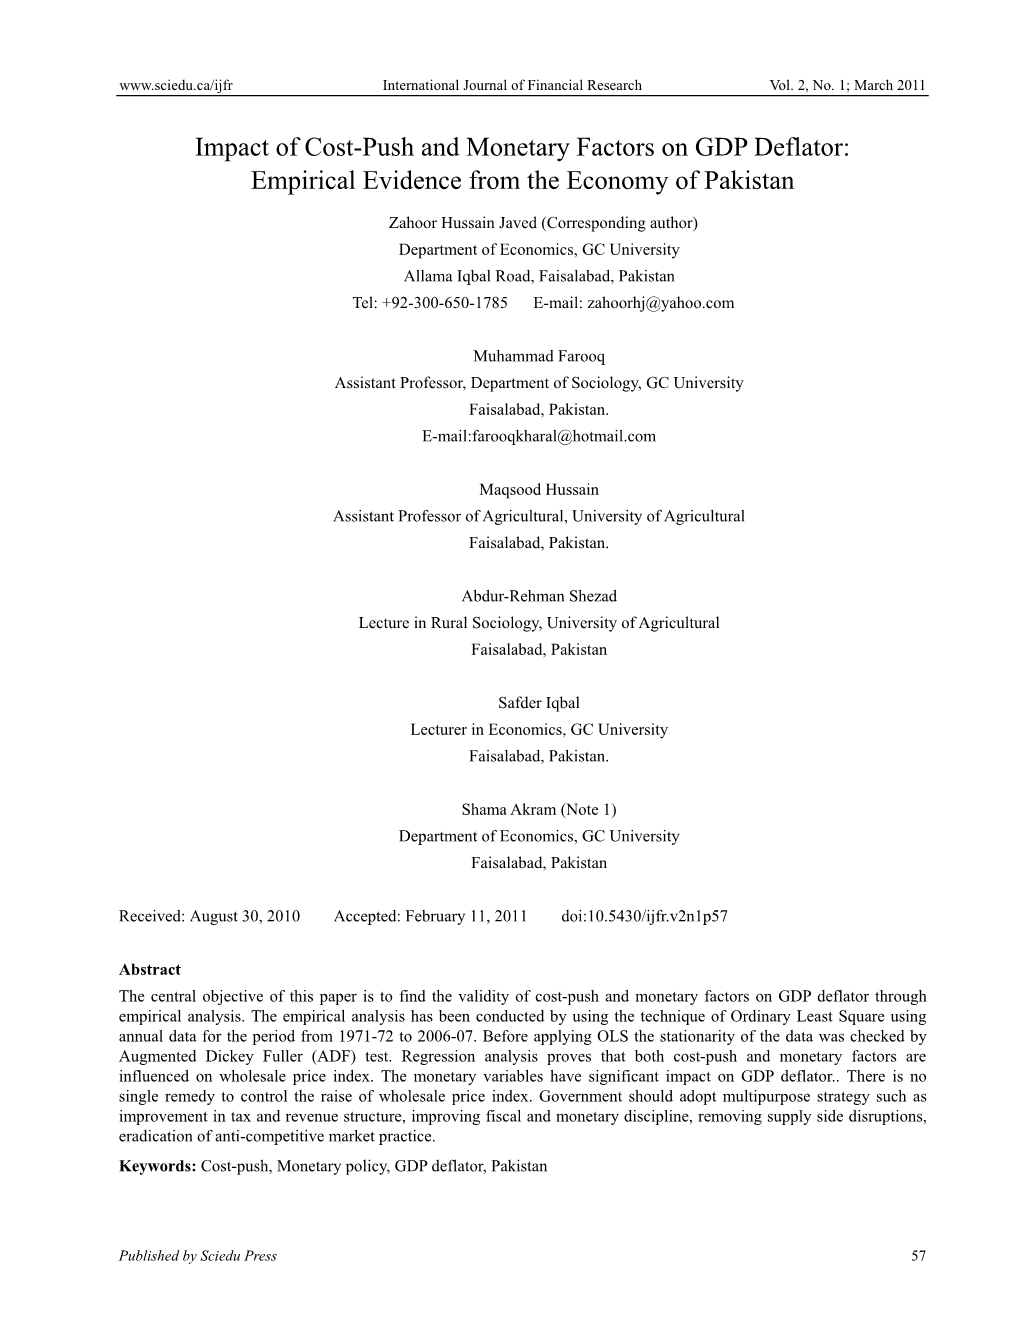 Impact of Cost-Push and Monetary Factors on GDP Deflator: Empirical Evidence from the Economy of Pakistan